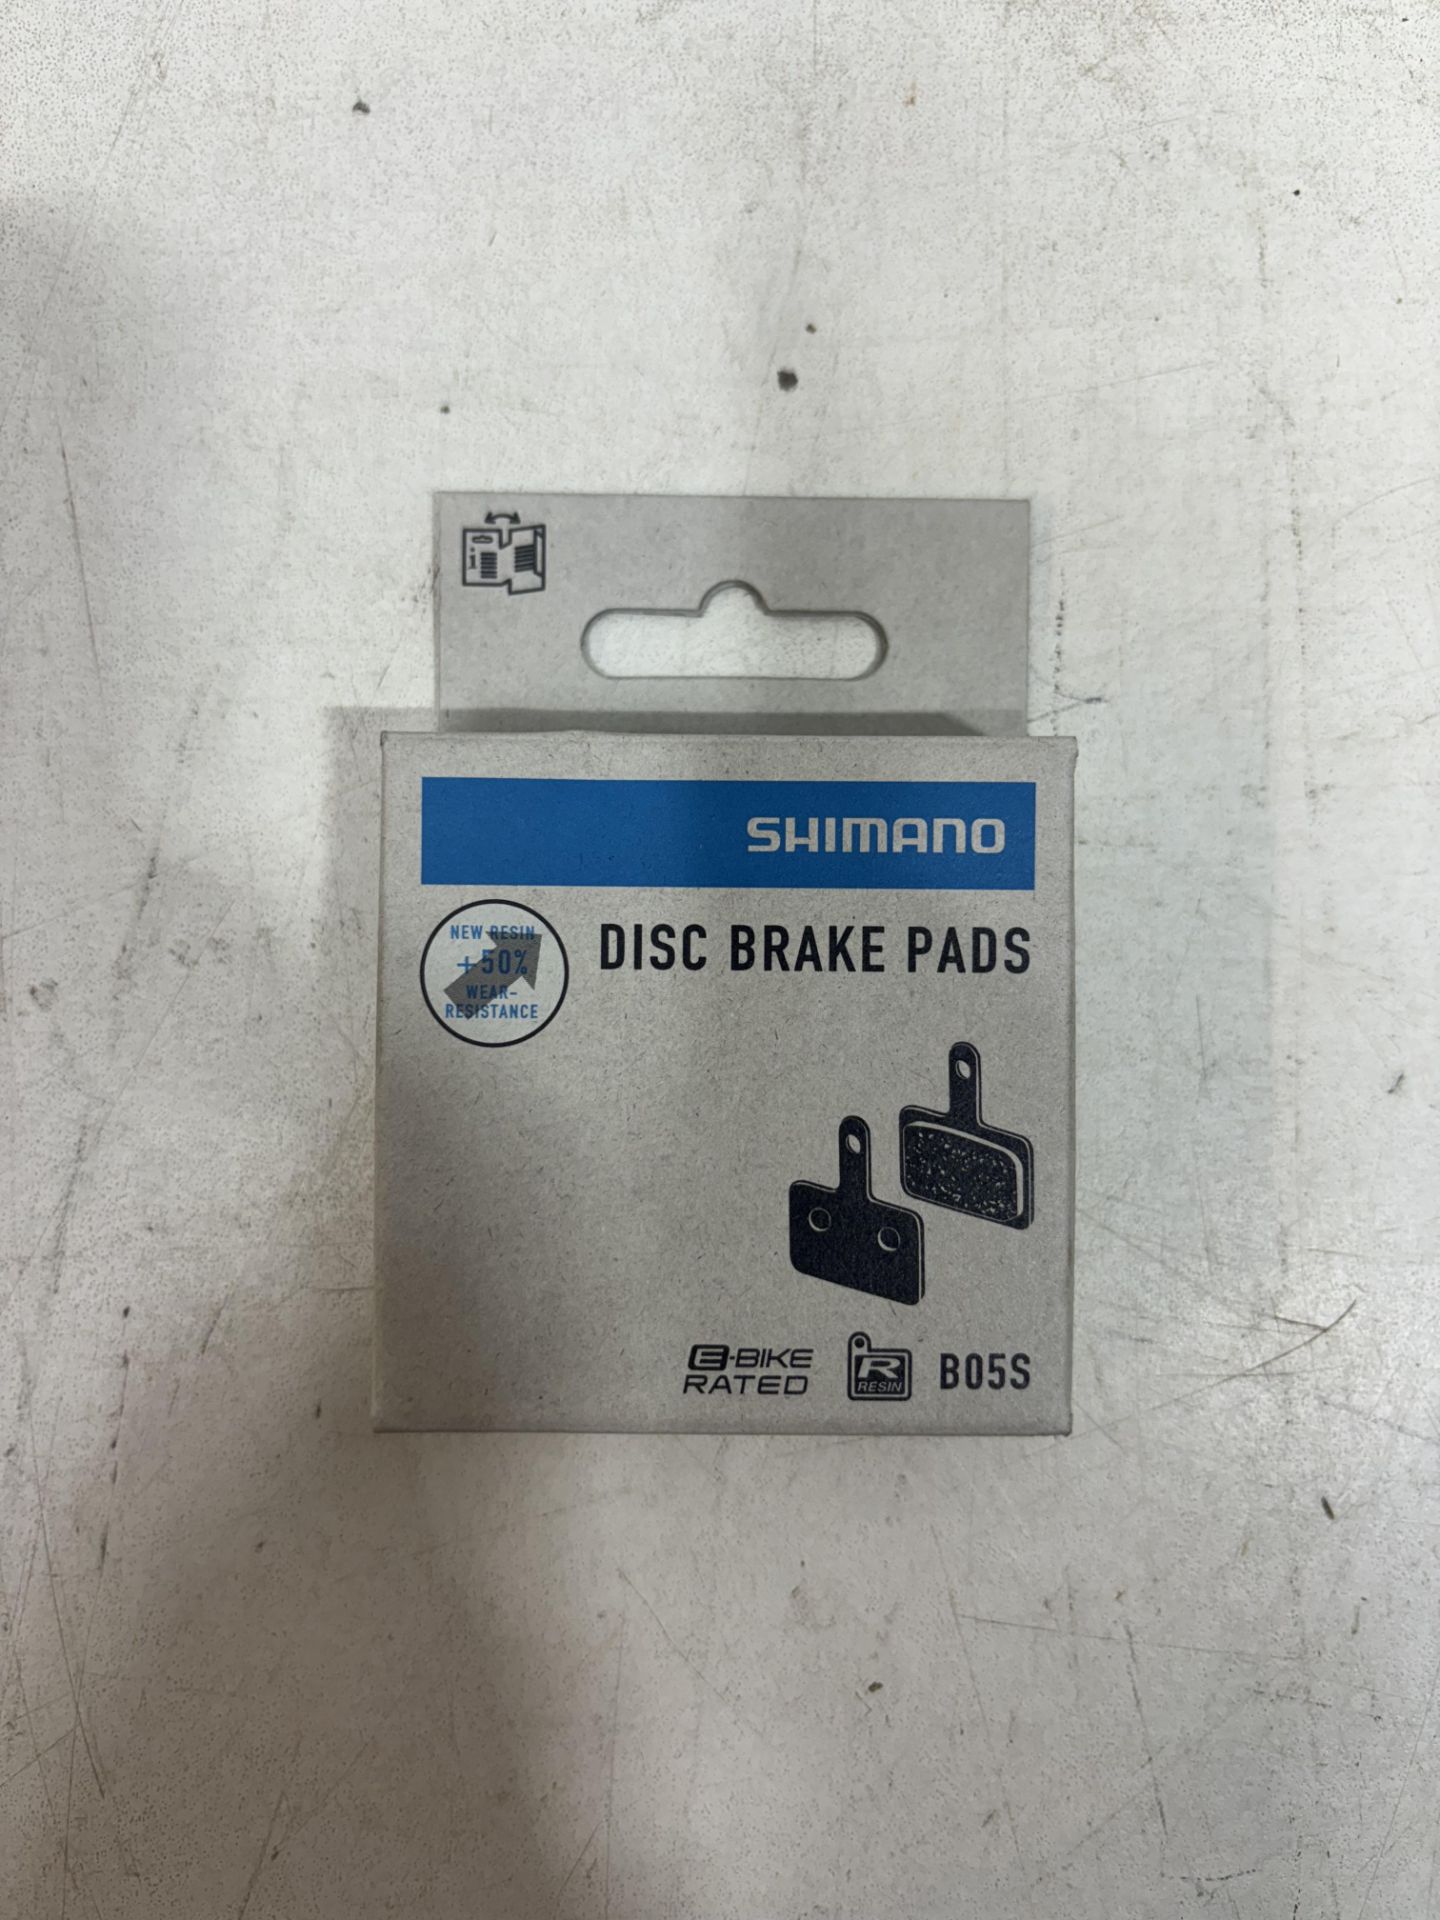 10 x Shimano B05S Disc Brake Pads and Spring, Steel-backed, Resin - Image 2 of 3